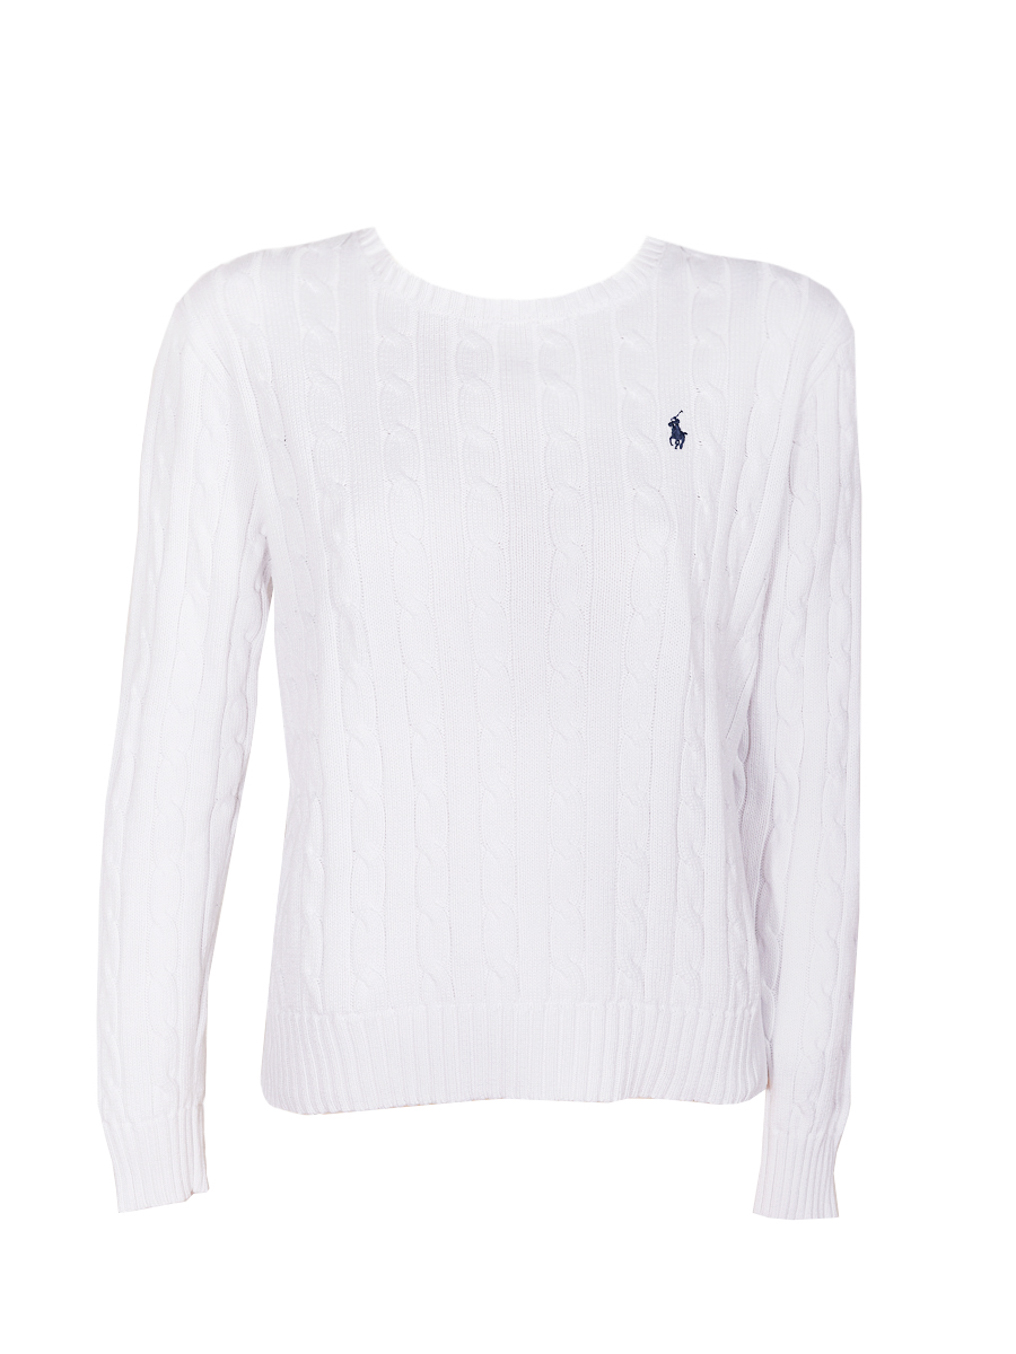 Polo Ralph Lauren White Cotton Knitted Sweater - Preowned